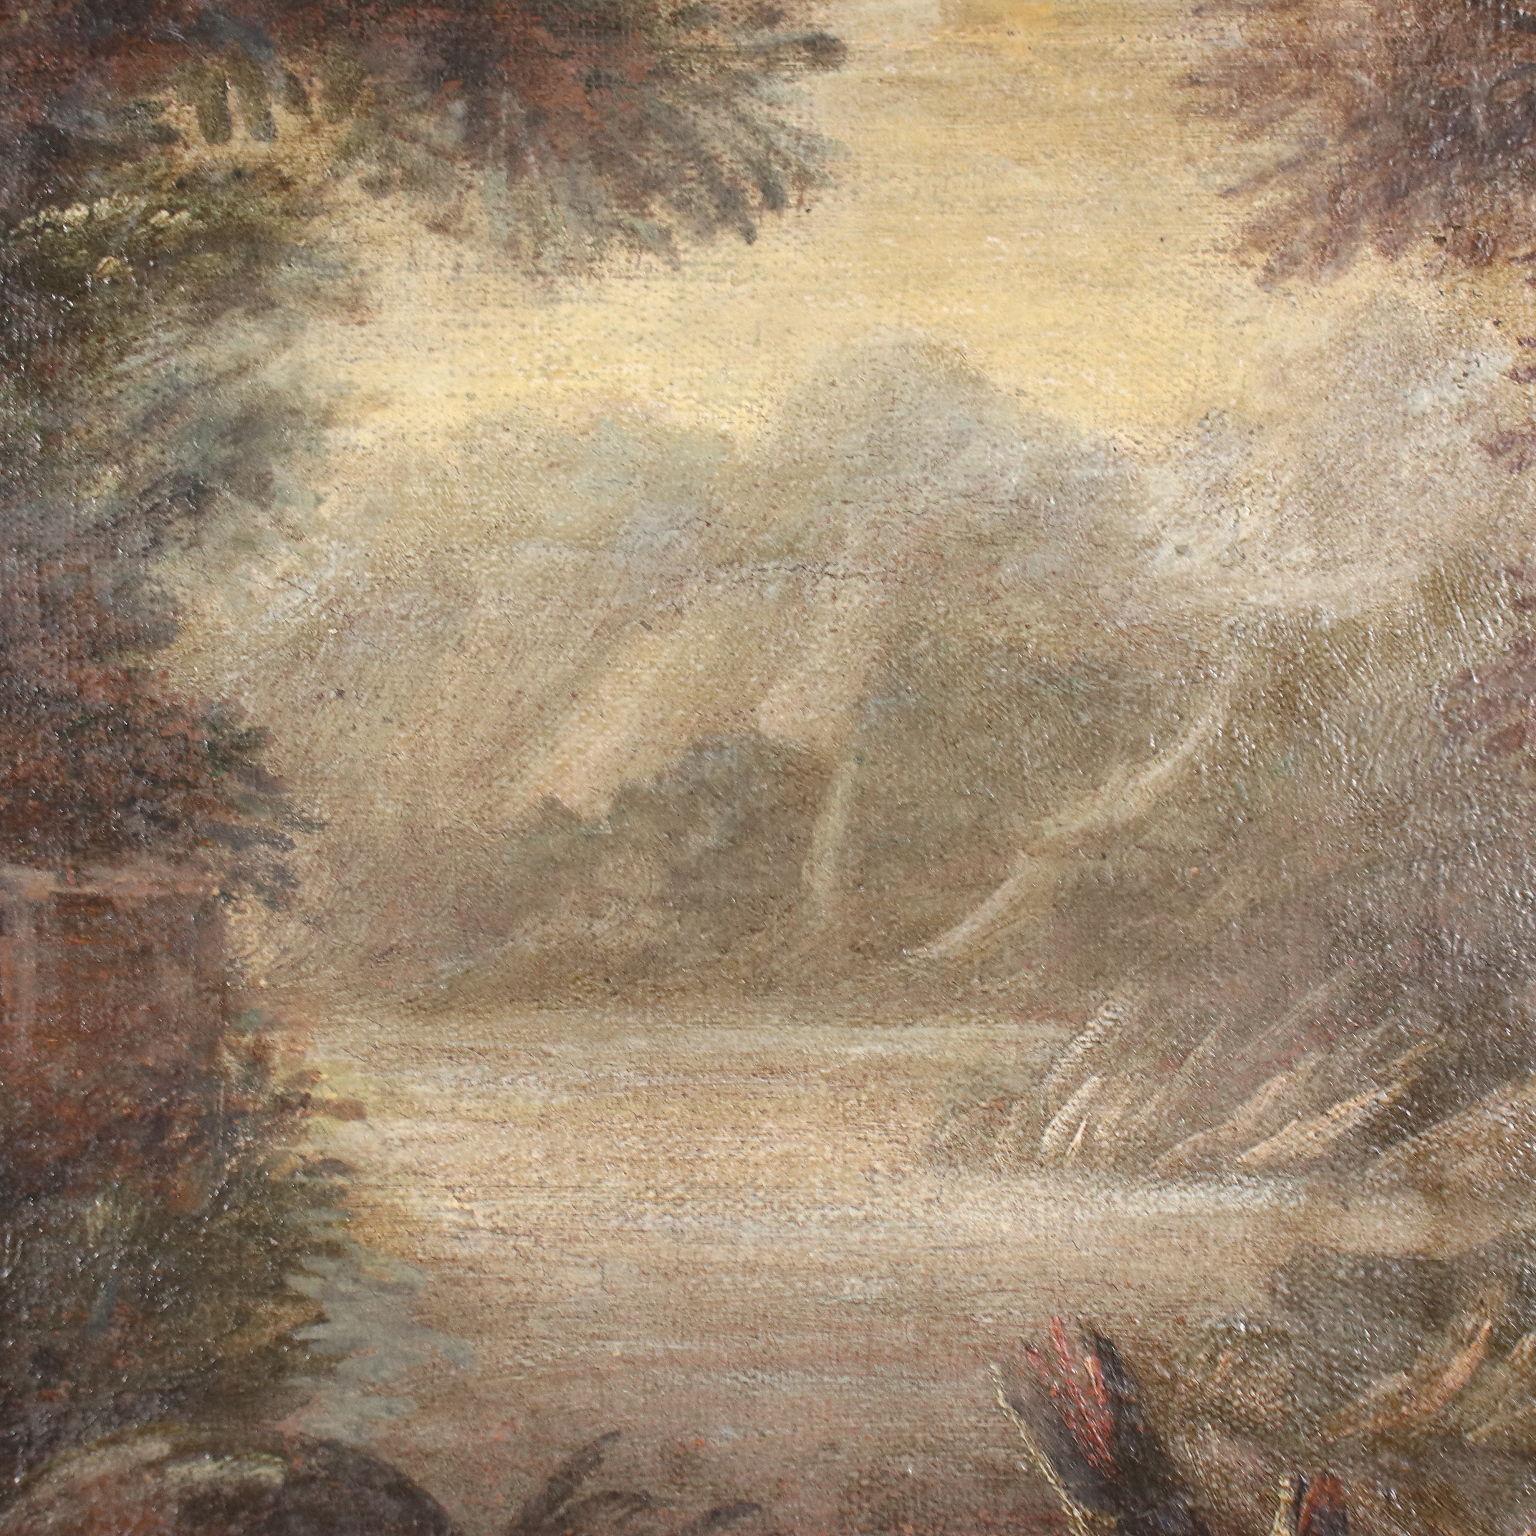 Landscape with Figures, oil on canvas, 18th century - Brown Landscape Painting by Unknown